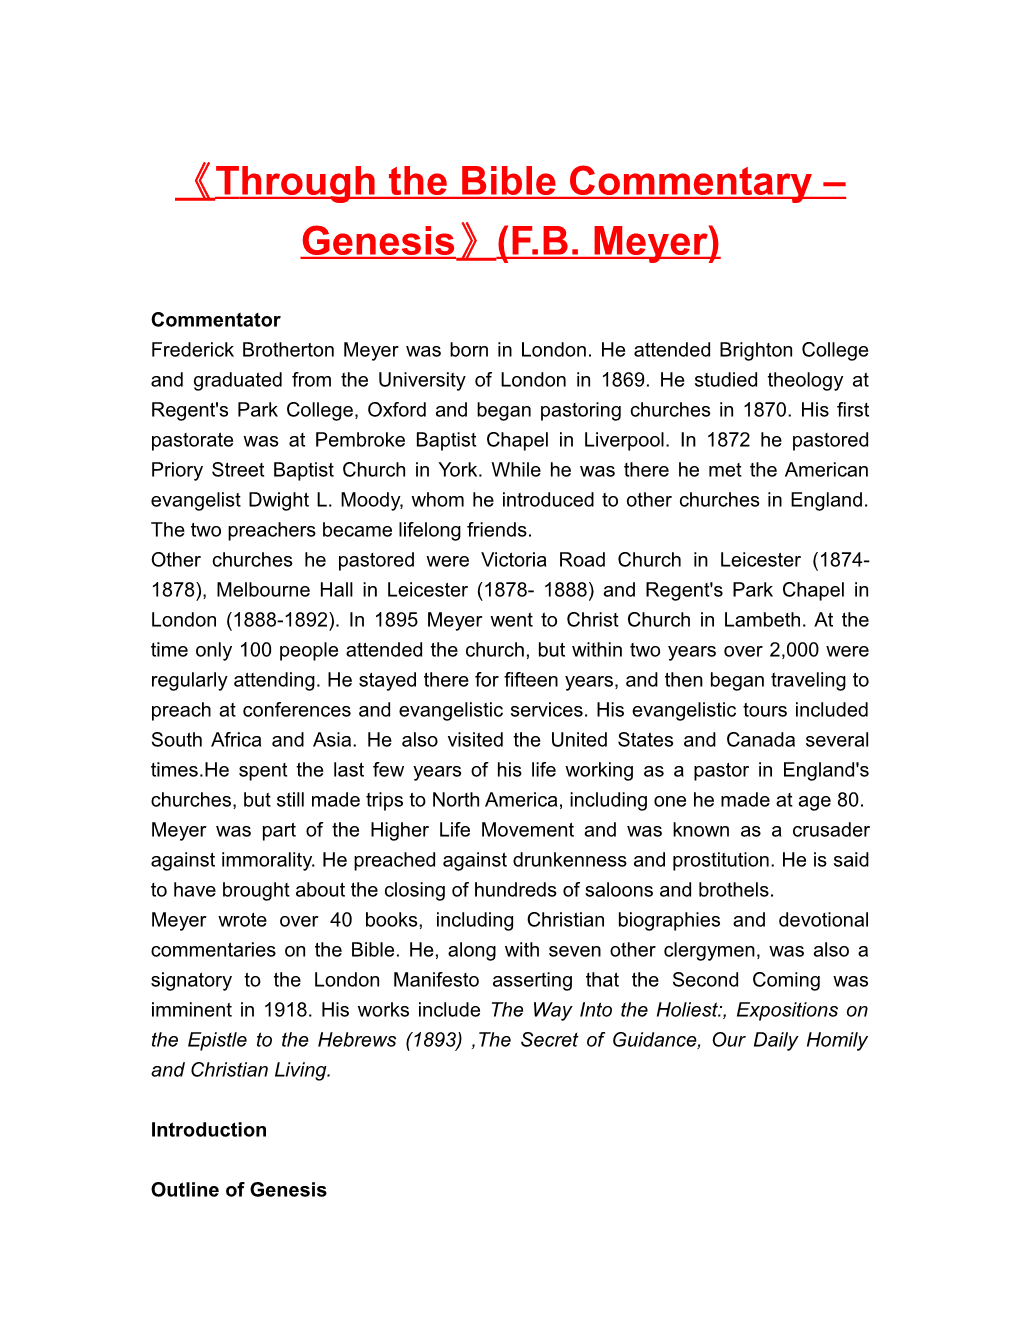 Through the Bible Commentary Genesis (F.B. Meyer)